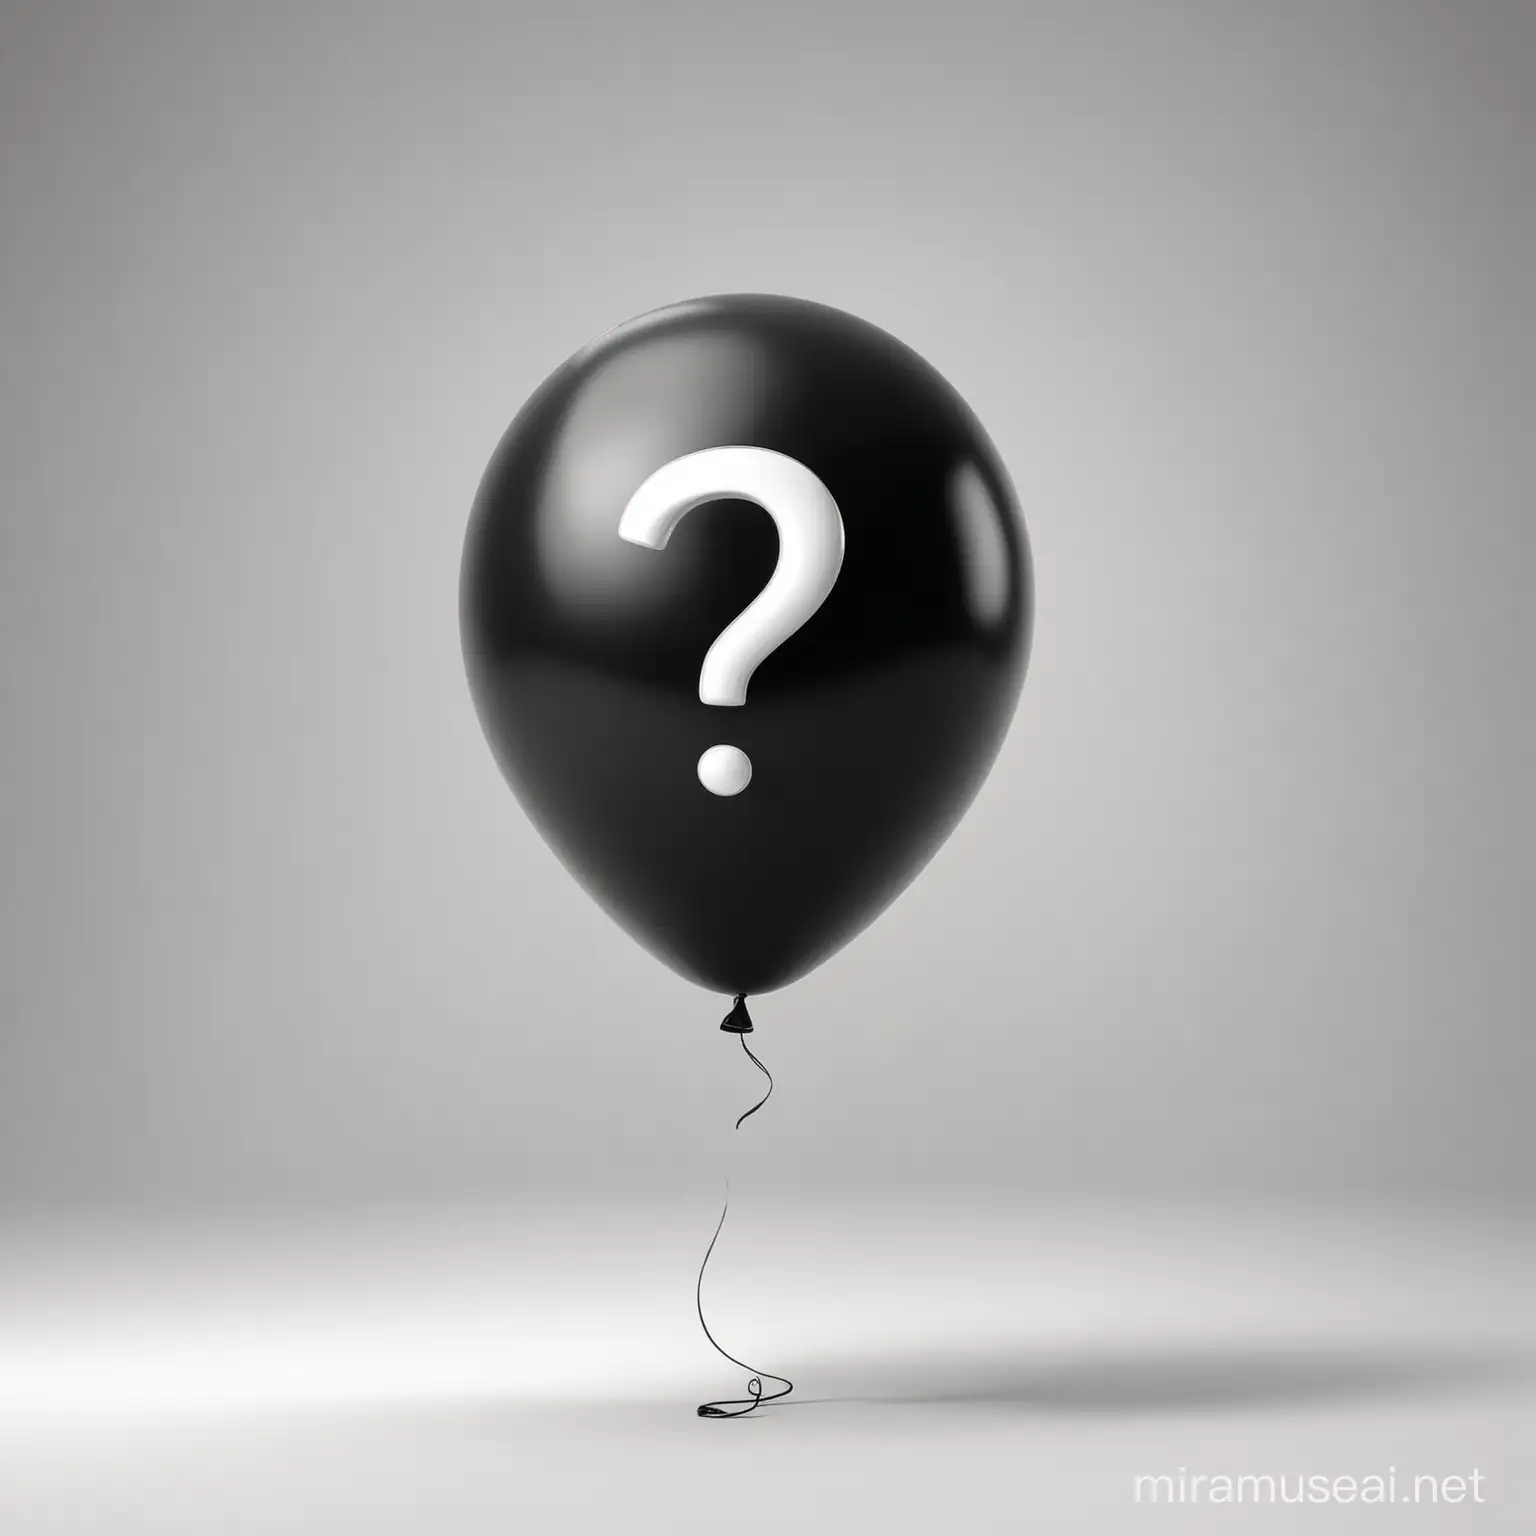 Black Baloon with question, Pixar 3d, background white